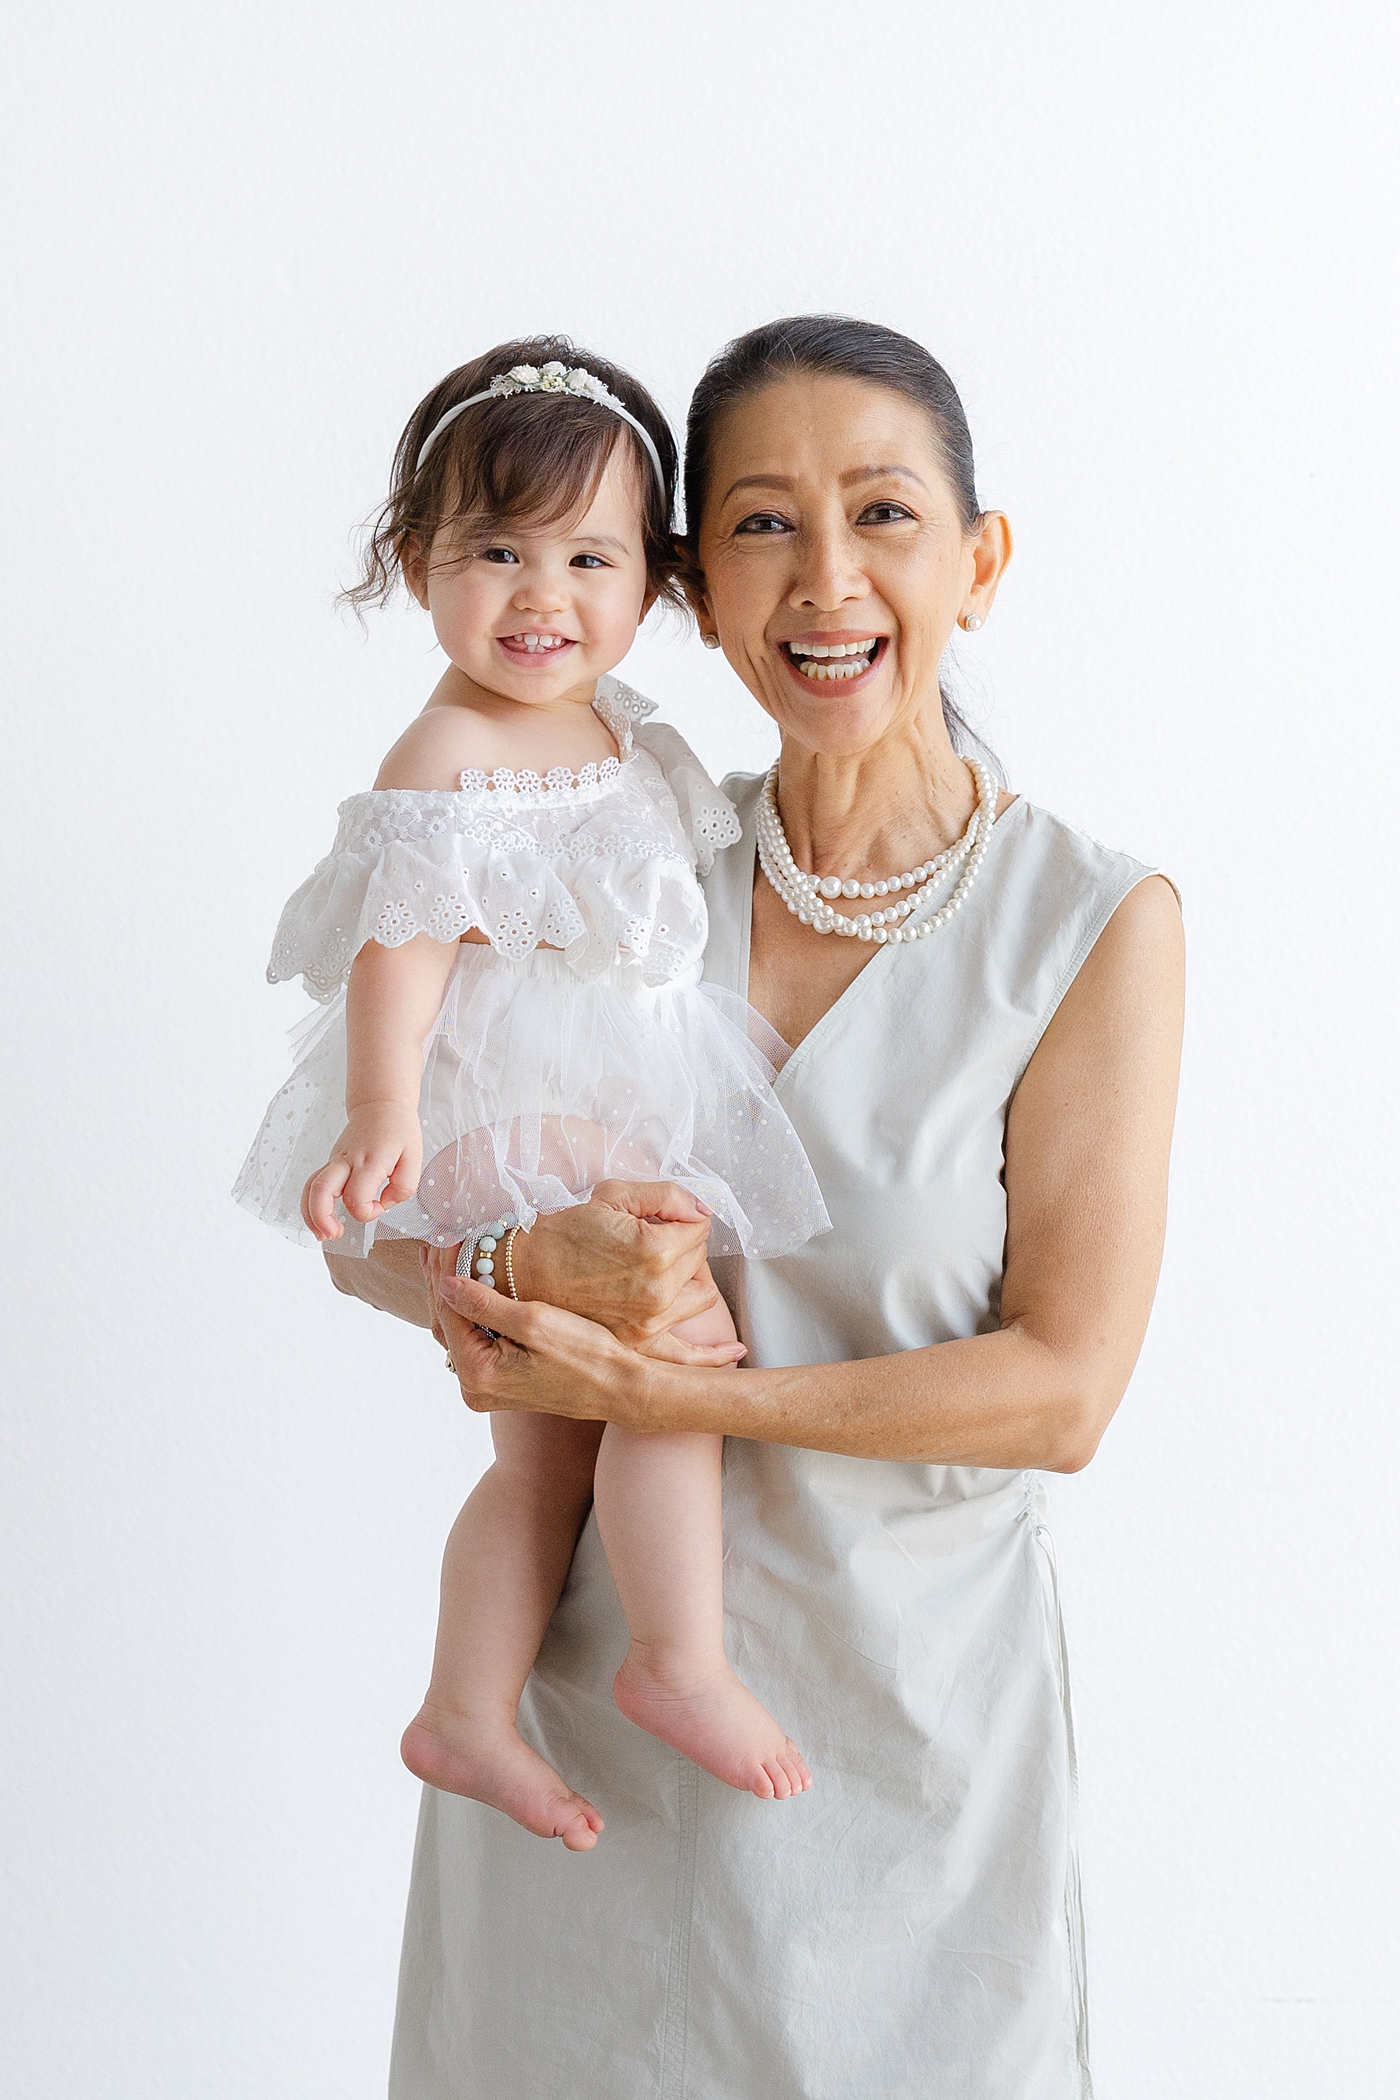 Baby girl with her grandma smiling during her one year studio milestone session| Image by Sana Ahmed Photography